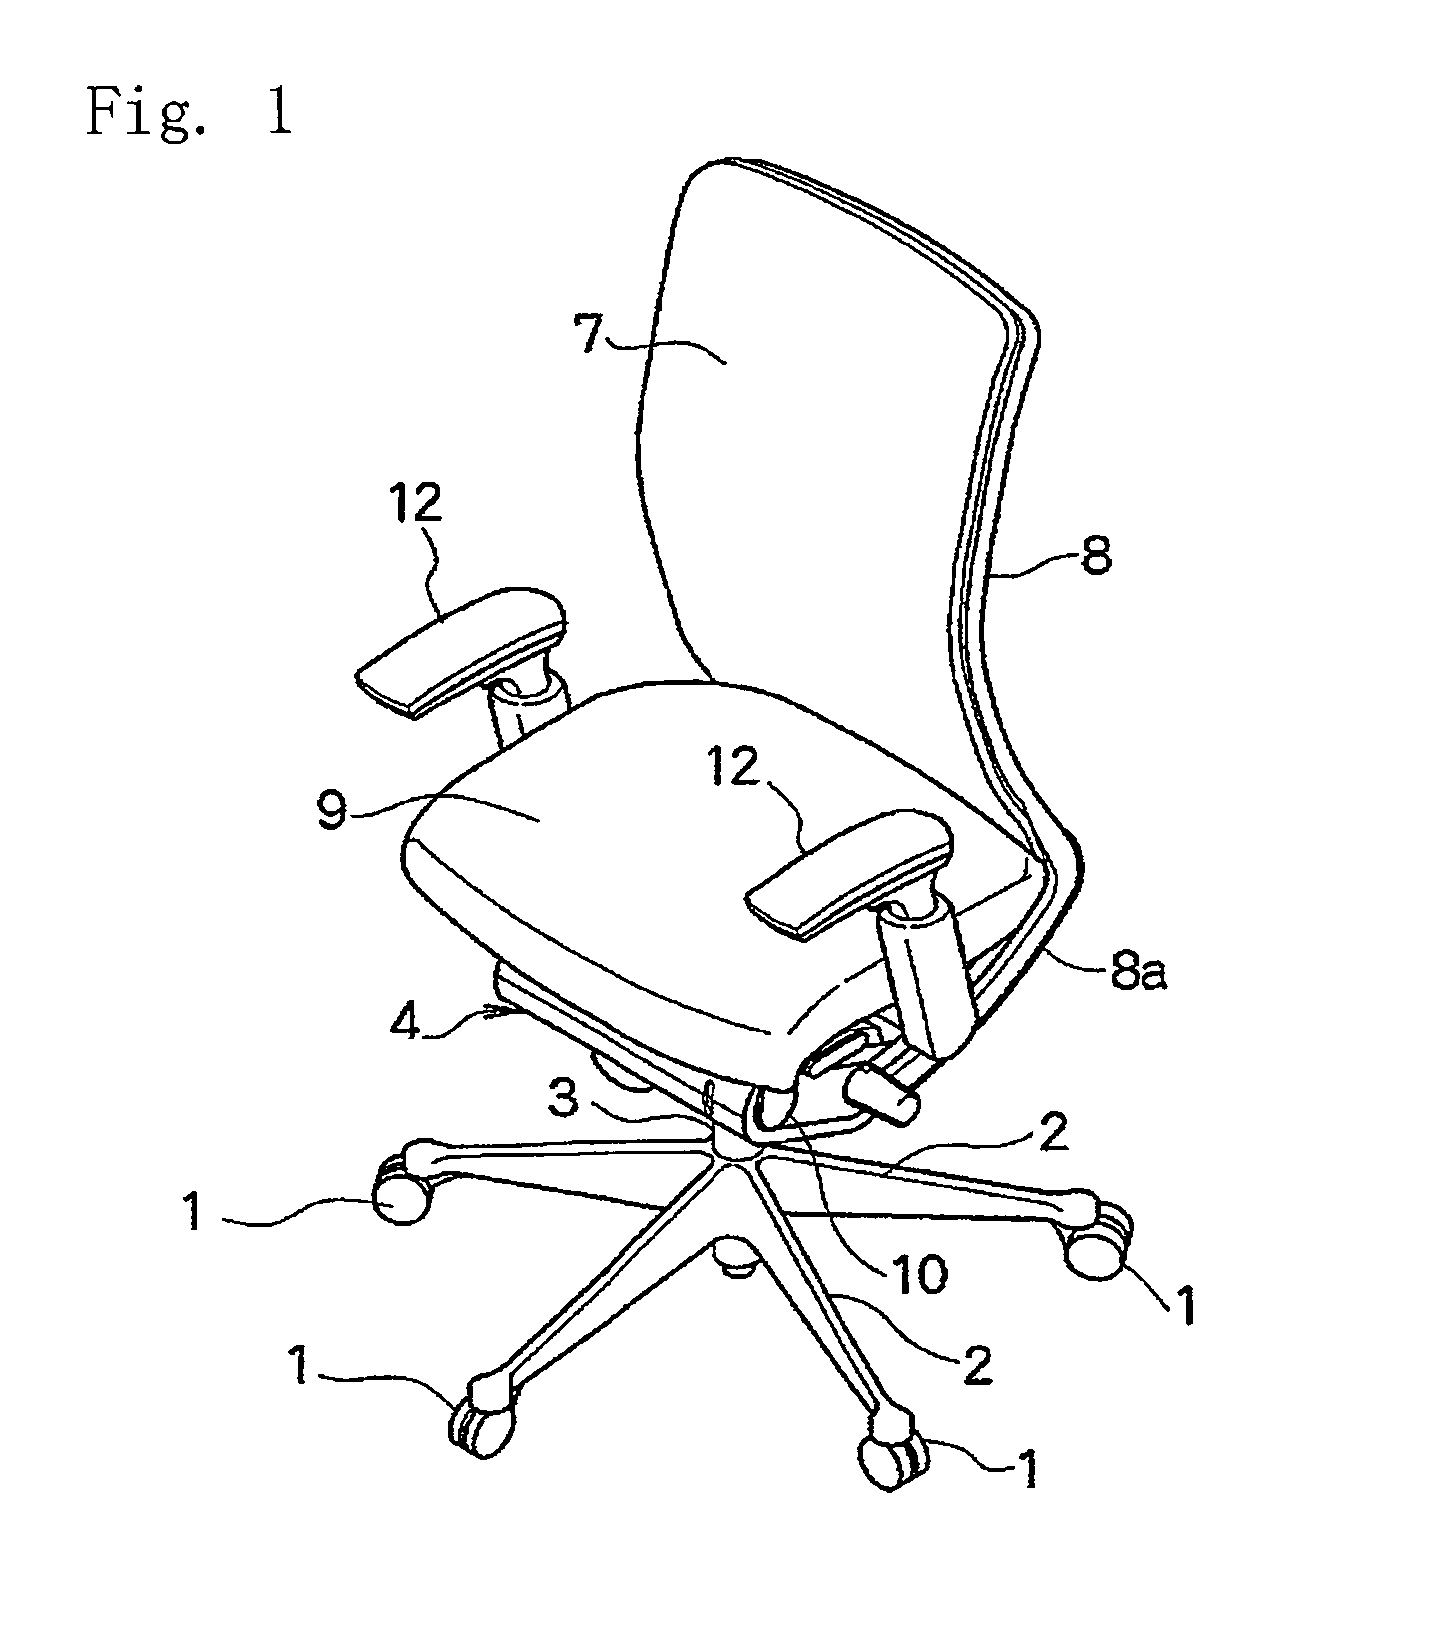 Locking device for a movable member in a chair